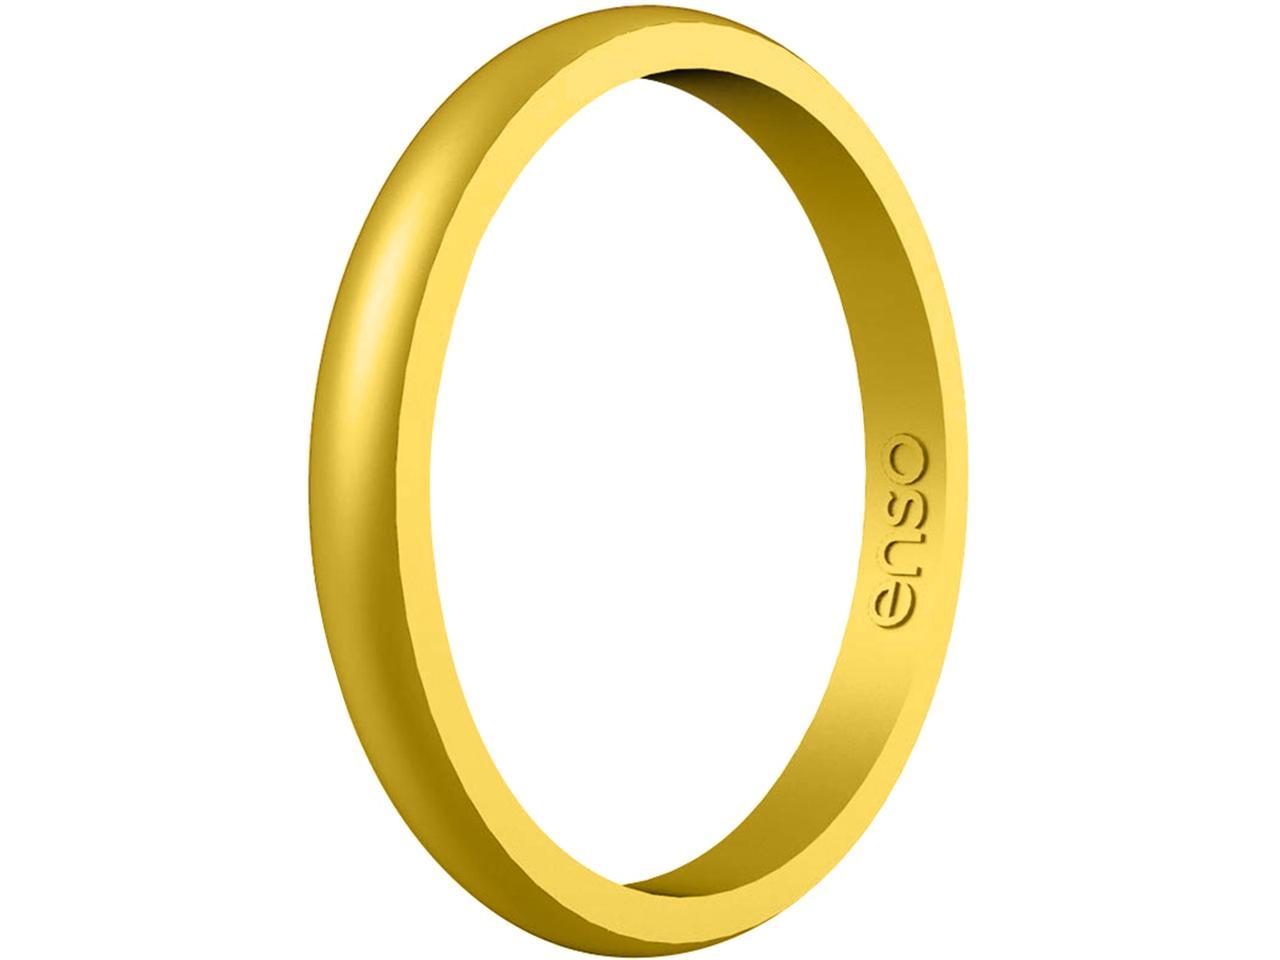 enso ring review